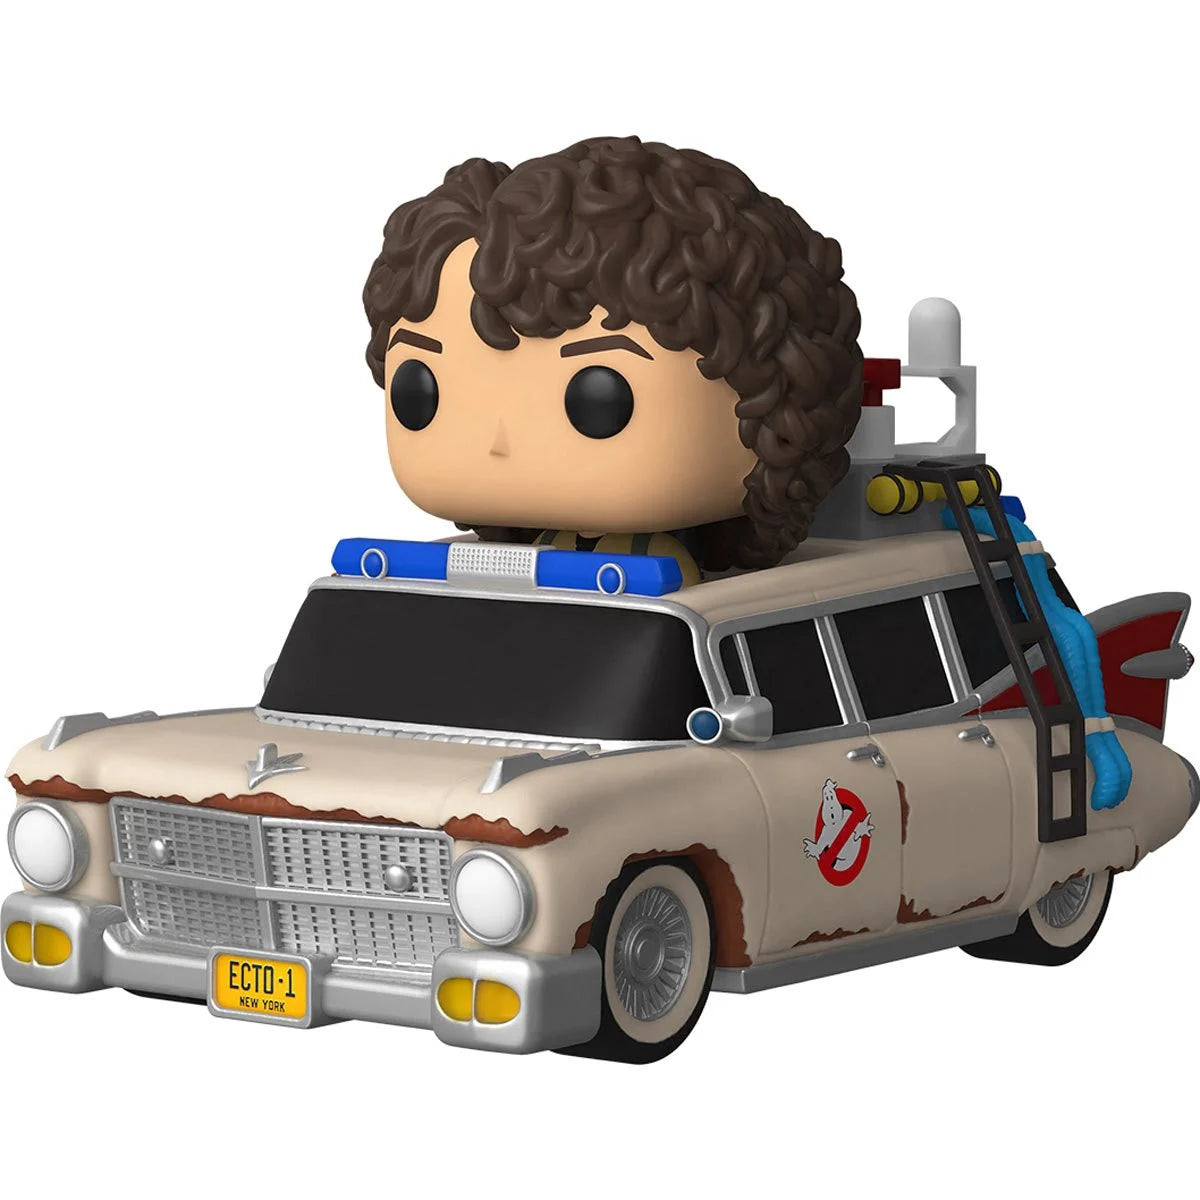 Funko Pop! Ghostbusters 3: Afterlife Ecto-1